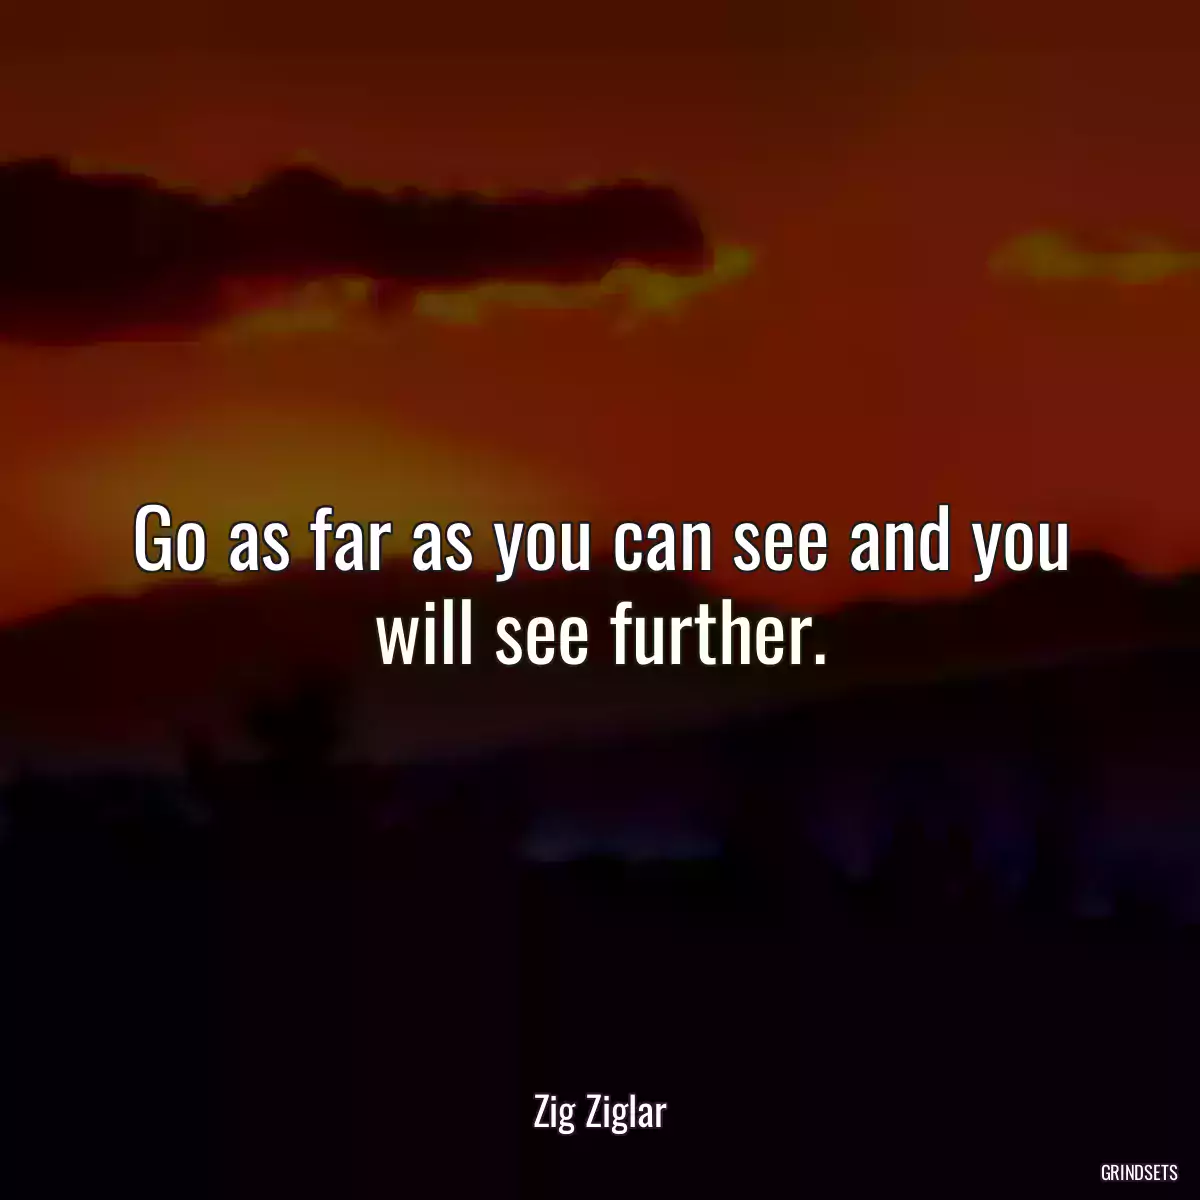 Go as far as you can see and you will see further.